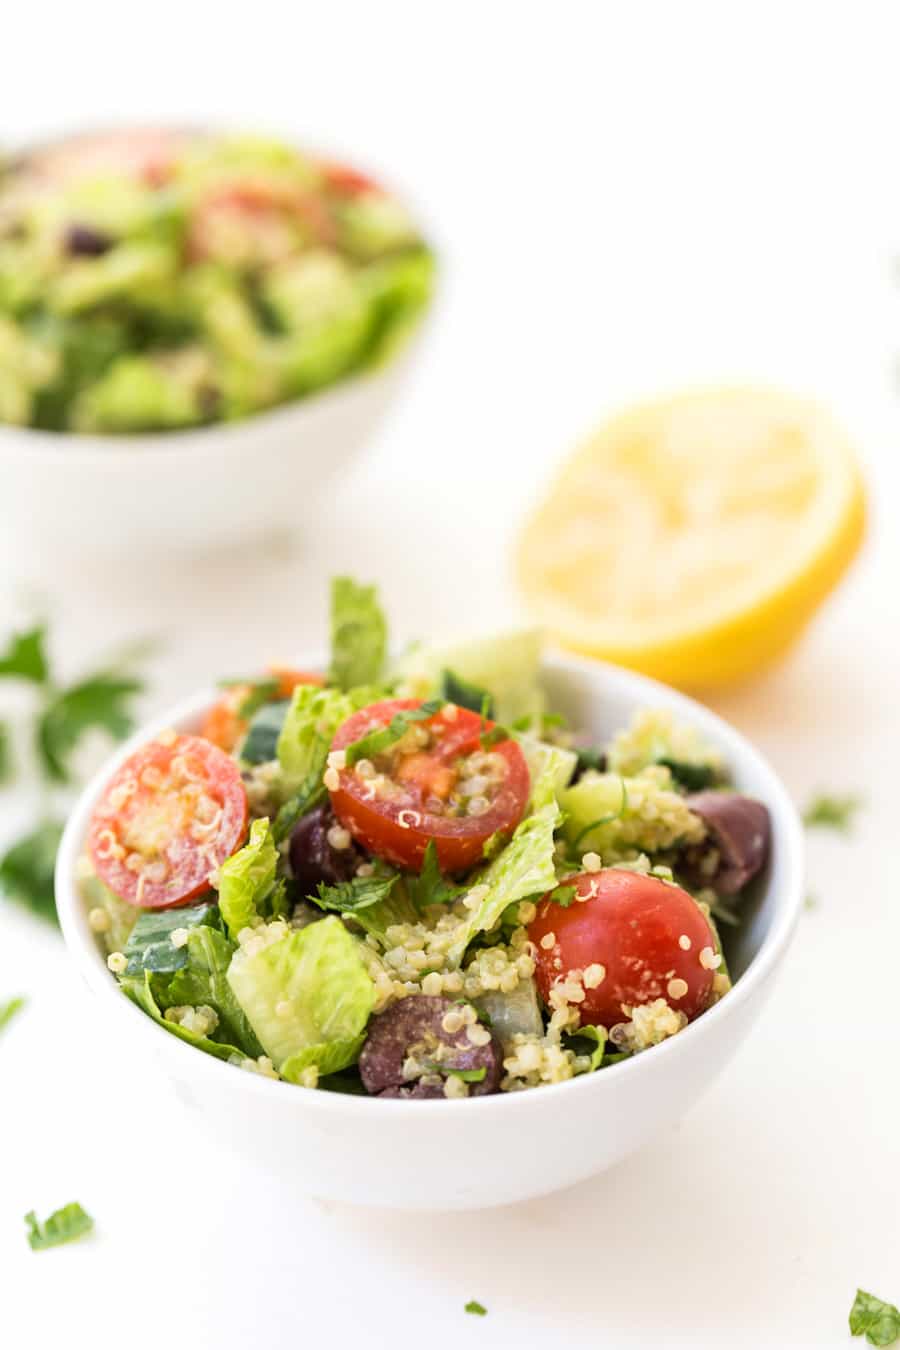 This simple Mediterranean Quinoa salad is the perfect dish to make whenever you're craving something light, fresh, summery, but still want it to be satisfying and filling!